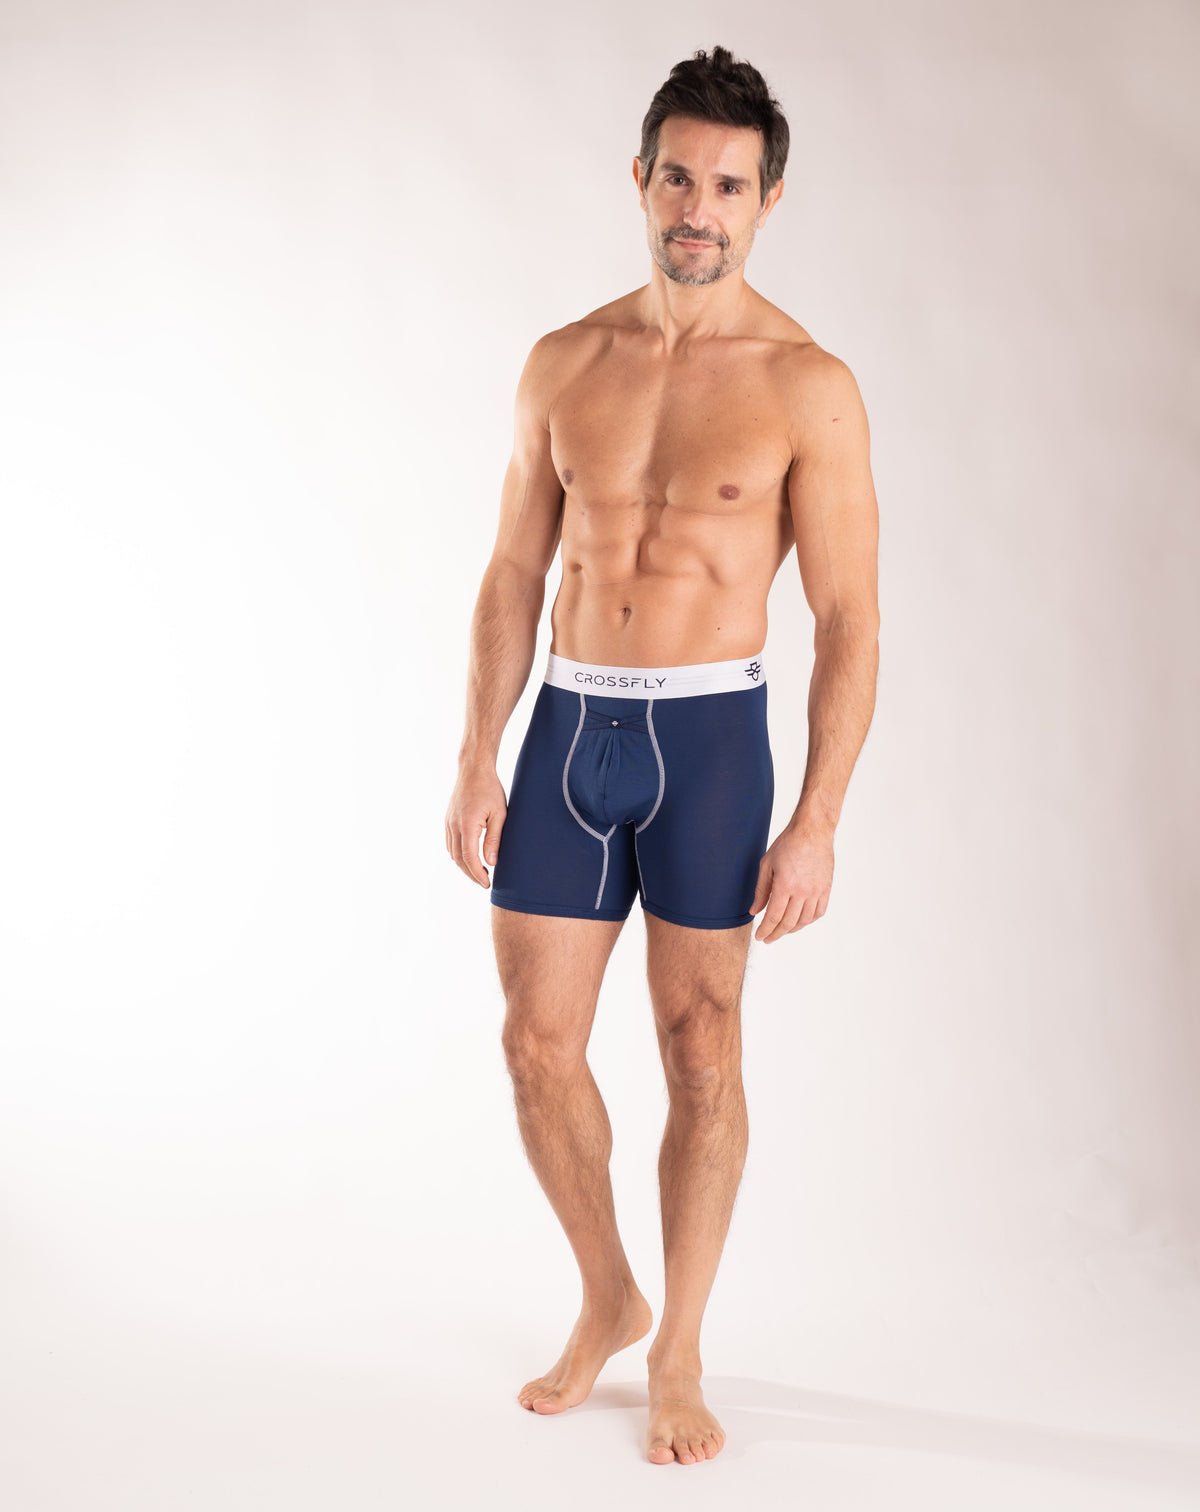 Crossfly men&#39;s IKON X 6&quot; navy / white boxers from the Everyday series, featuring X-Fly and Coccoon internal pocket support.